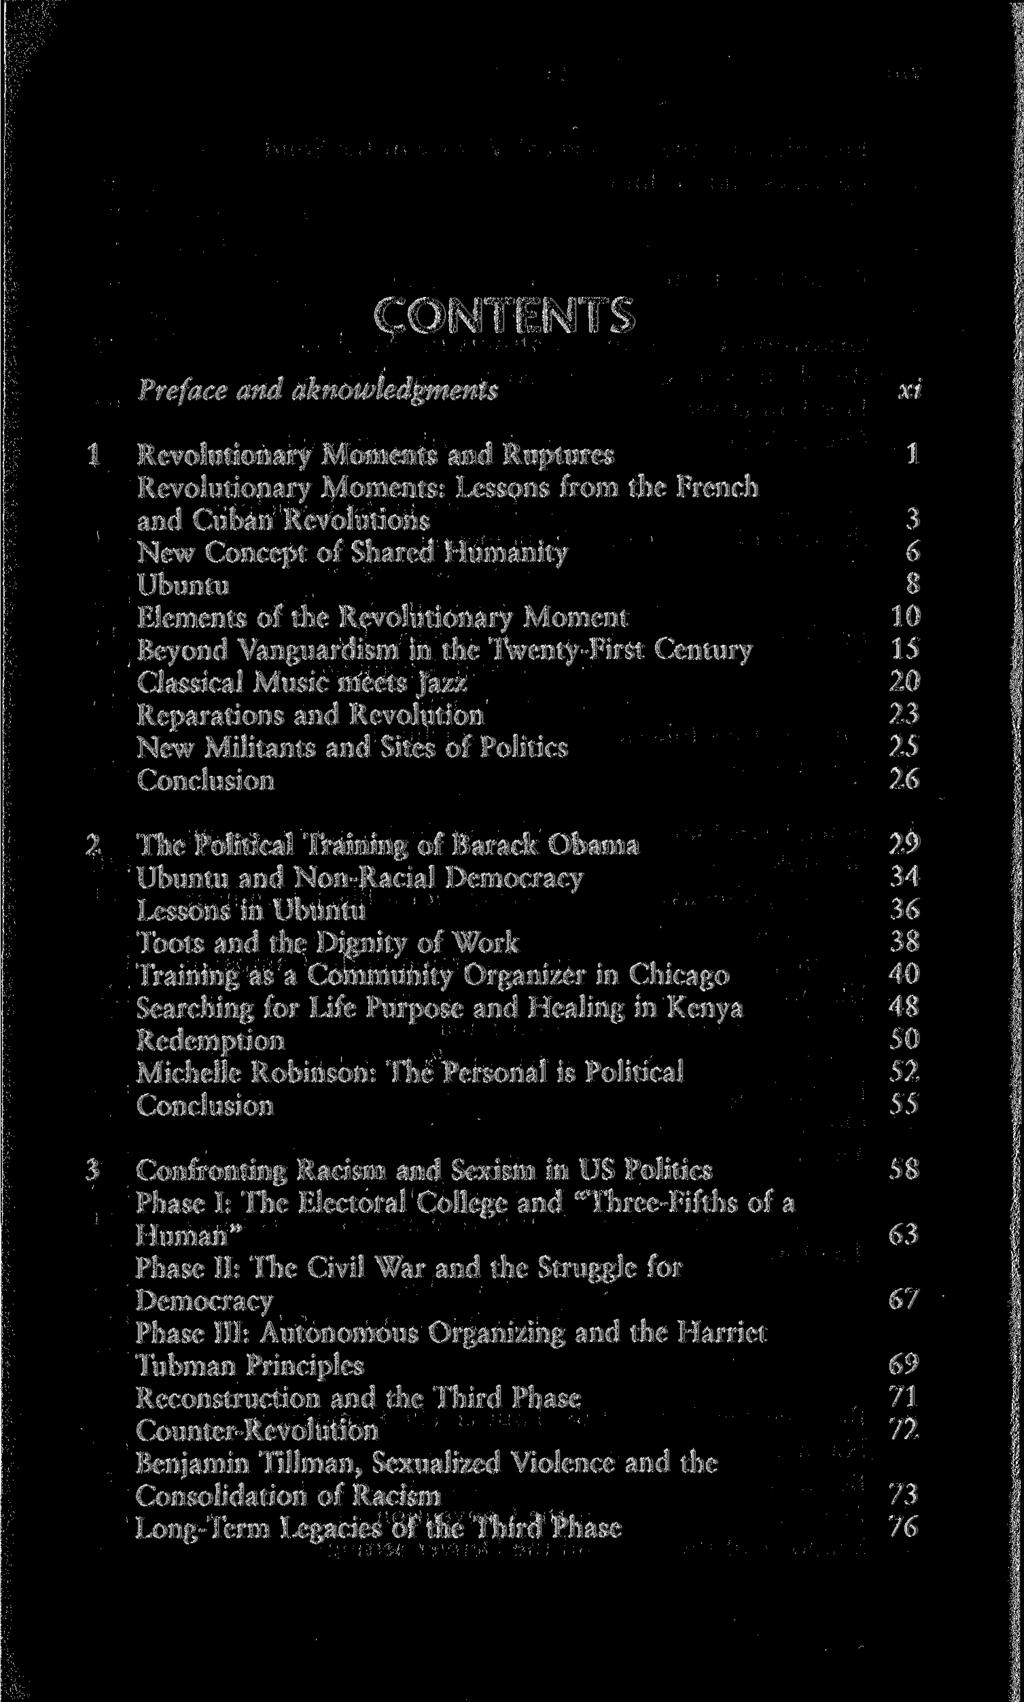 CONTENTS Preface and aknowledgments xi Revolutionary Moments and Ruptures 1 Revolutionary Moments: Lessons from the French and Cuban Revolutions 3 New Concept of Shared Humanity 6 Ubuntu 8 Elements